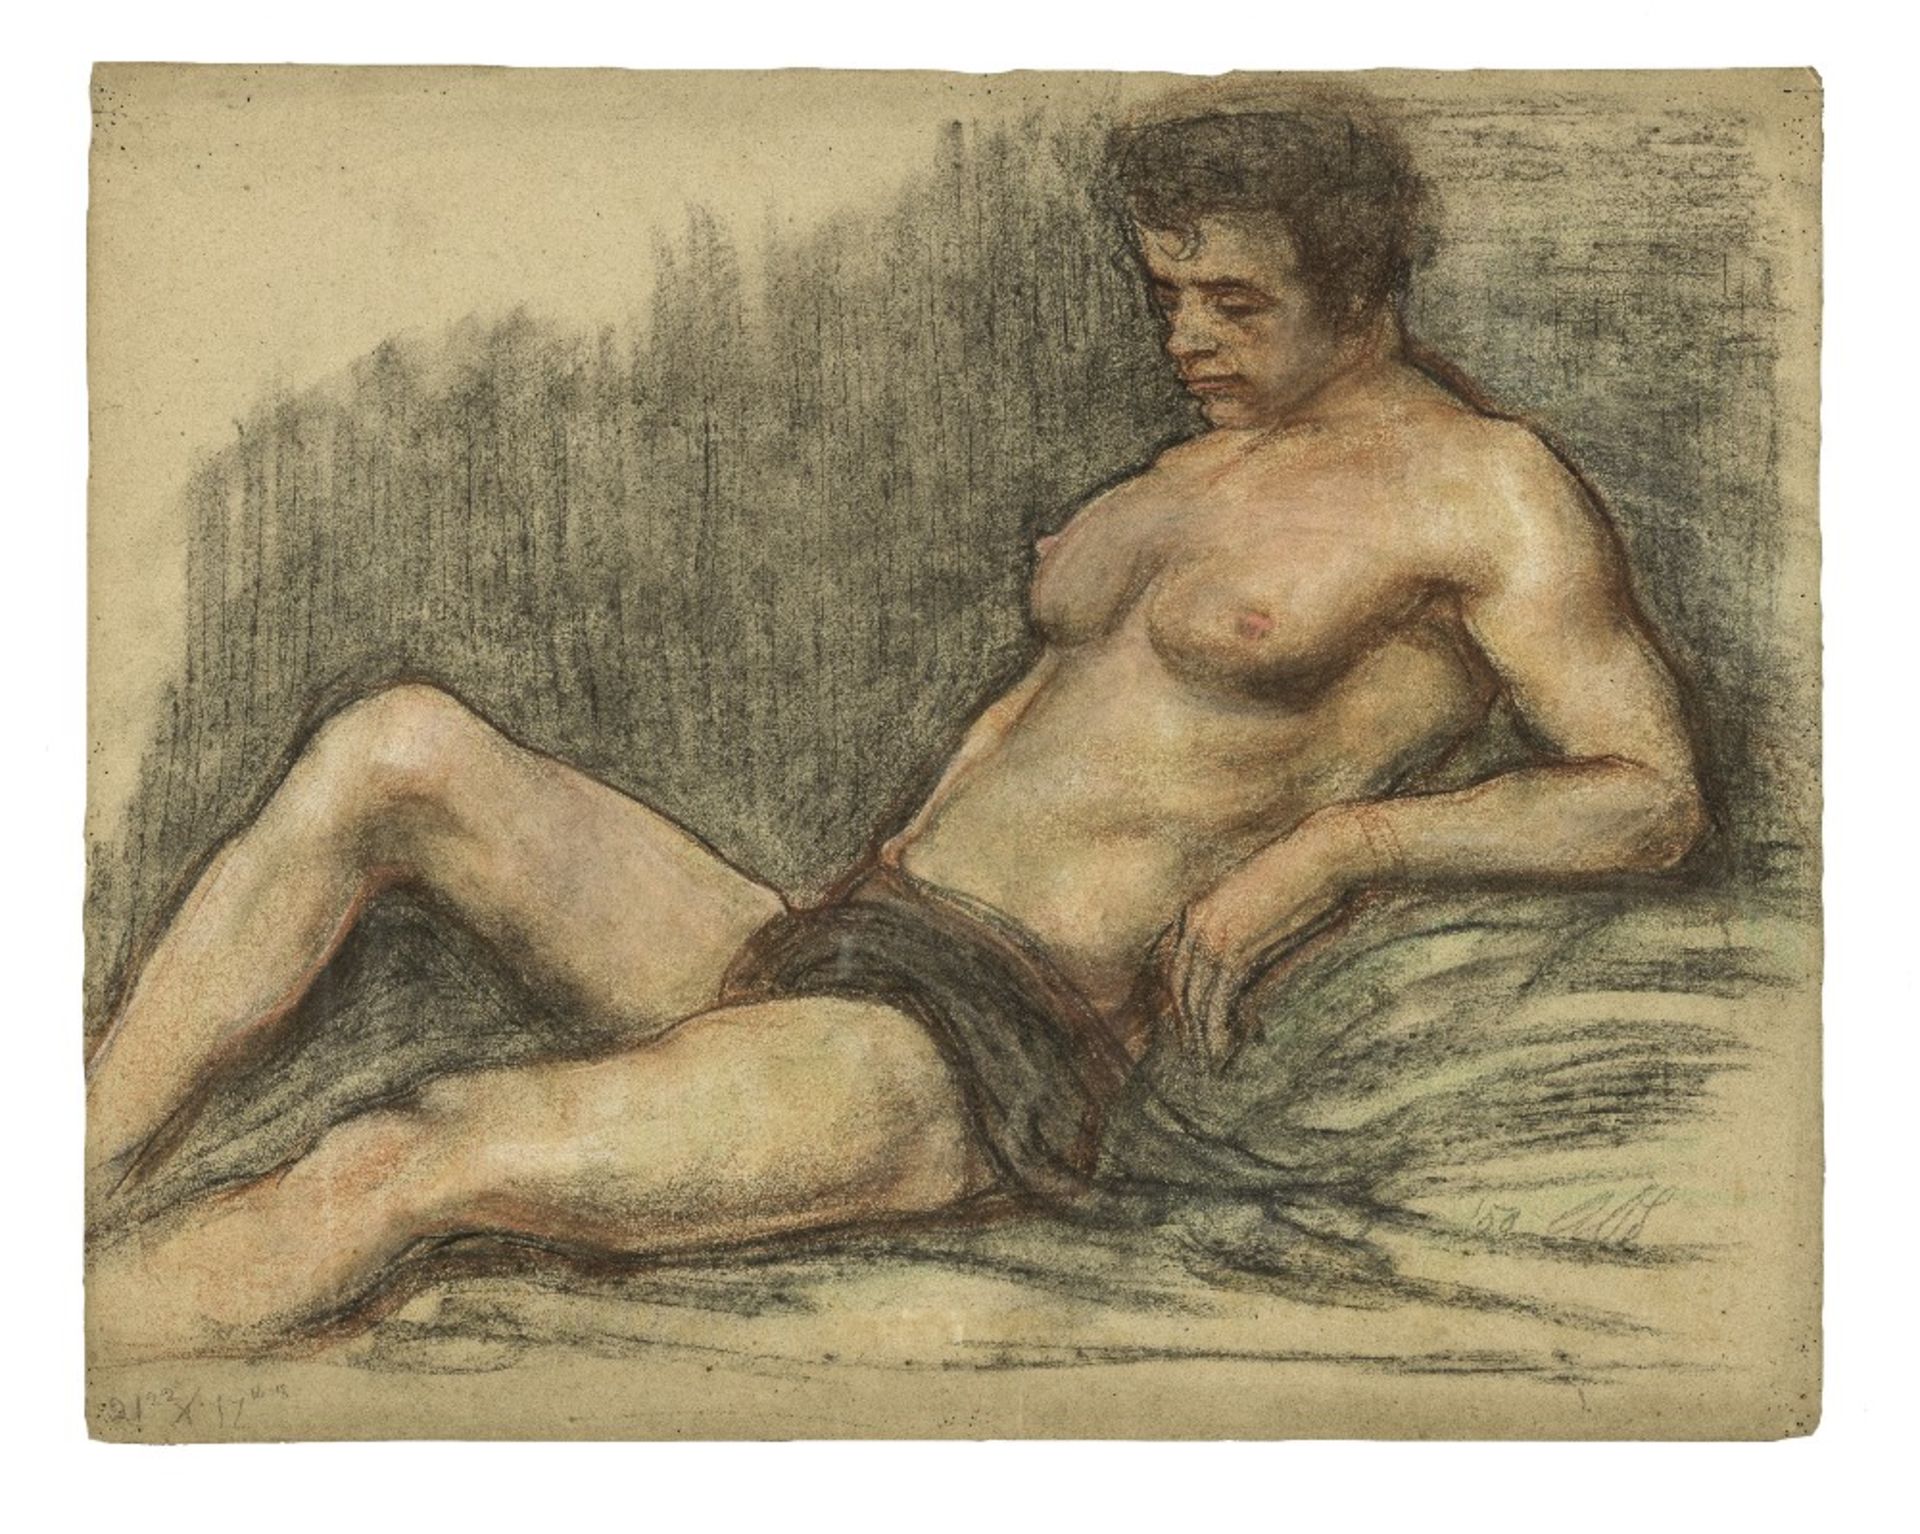 Austin Osman Spare (British, 1886-1956) Babs, A Reclining Male Nude